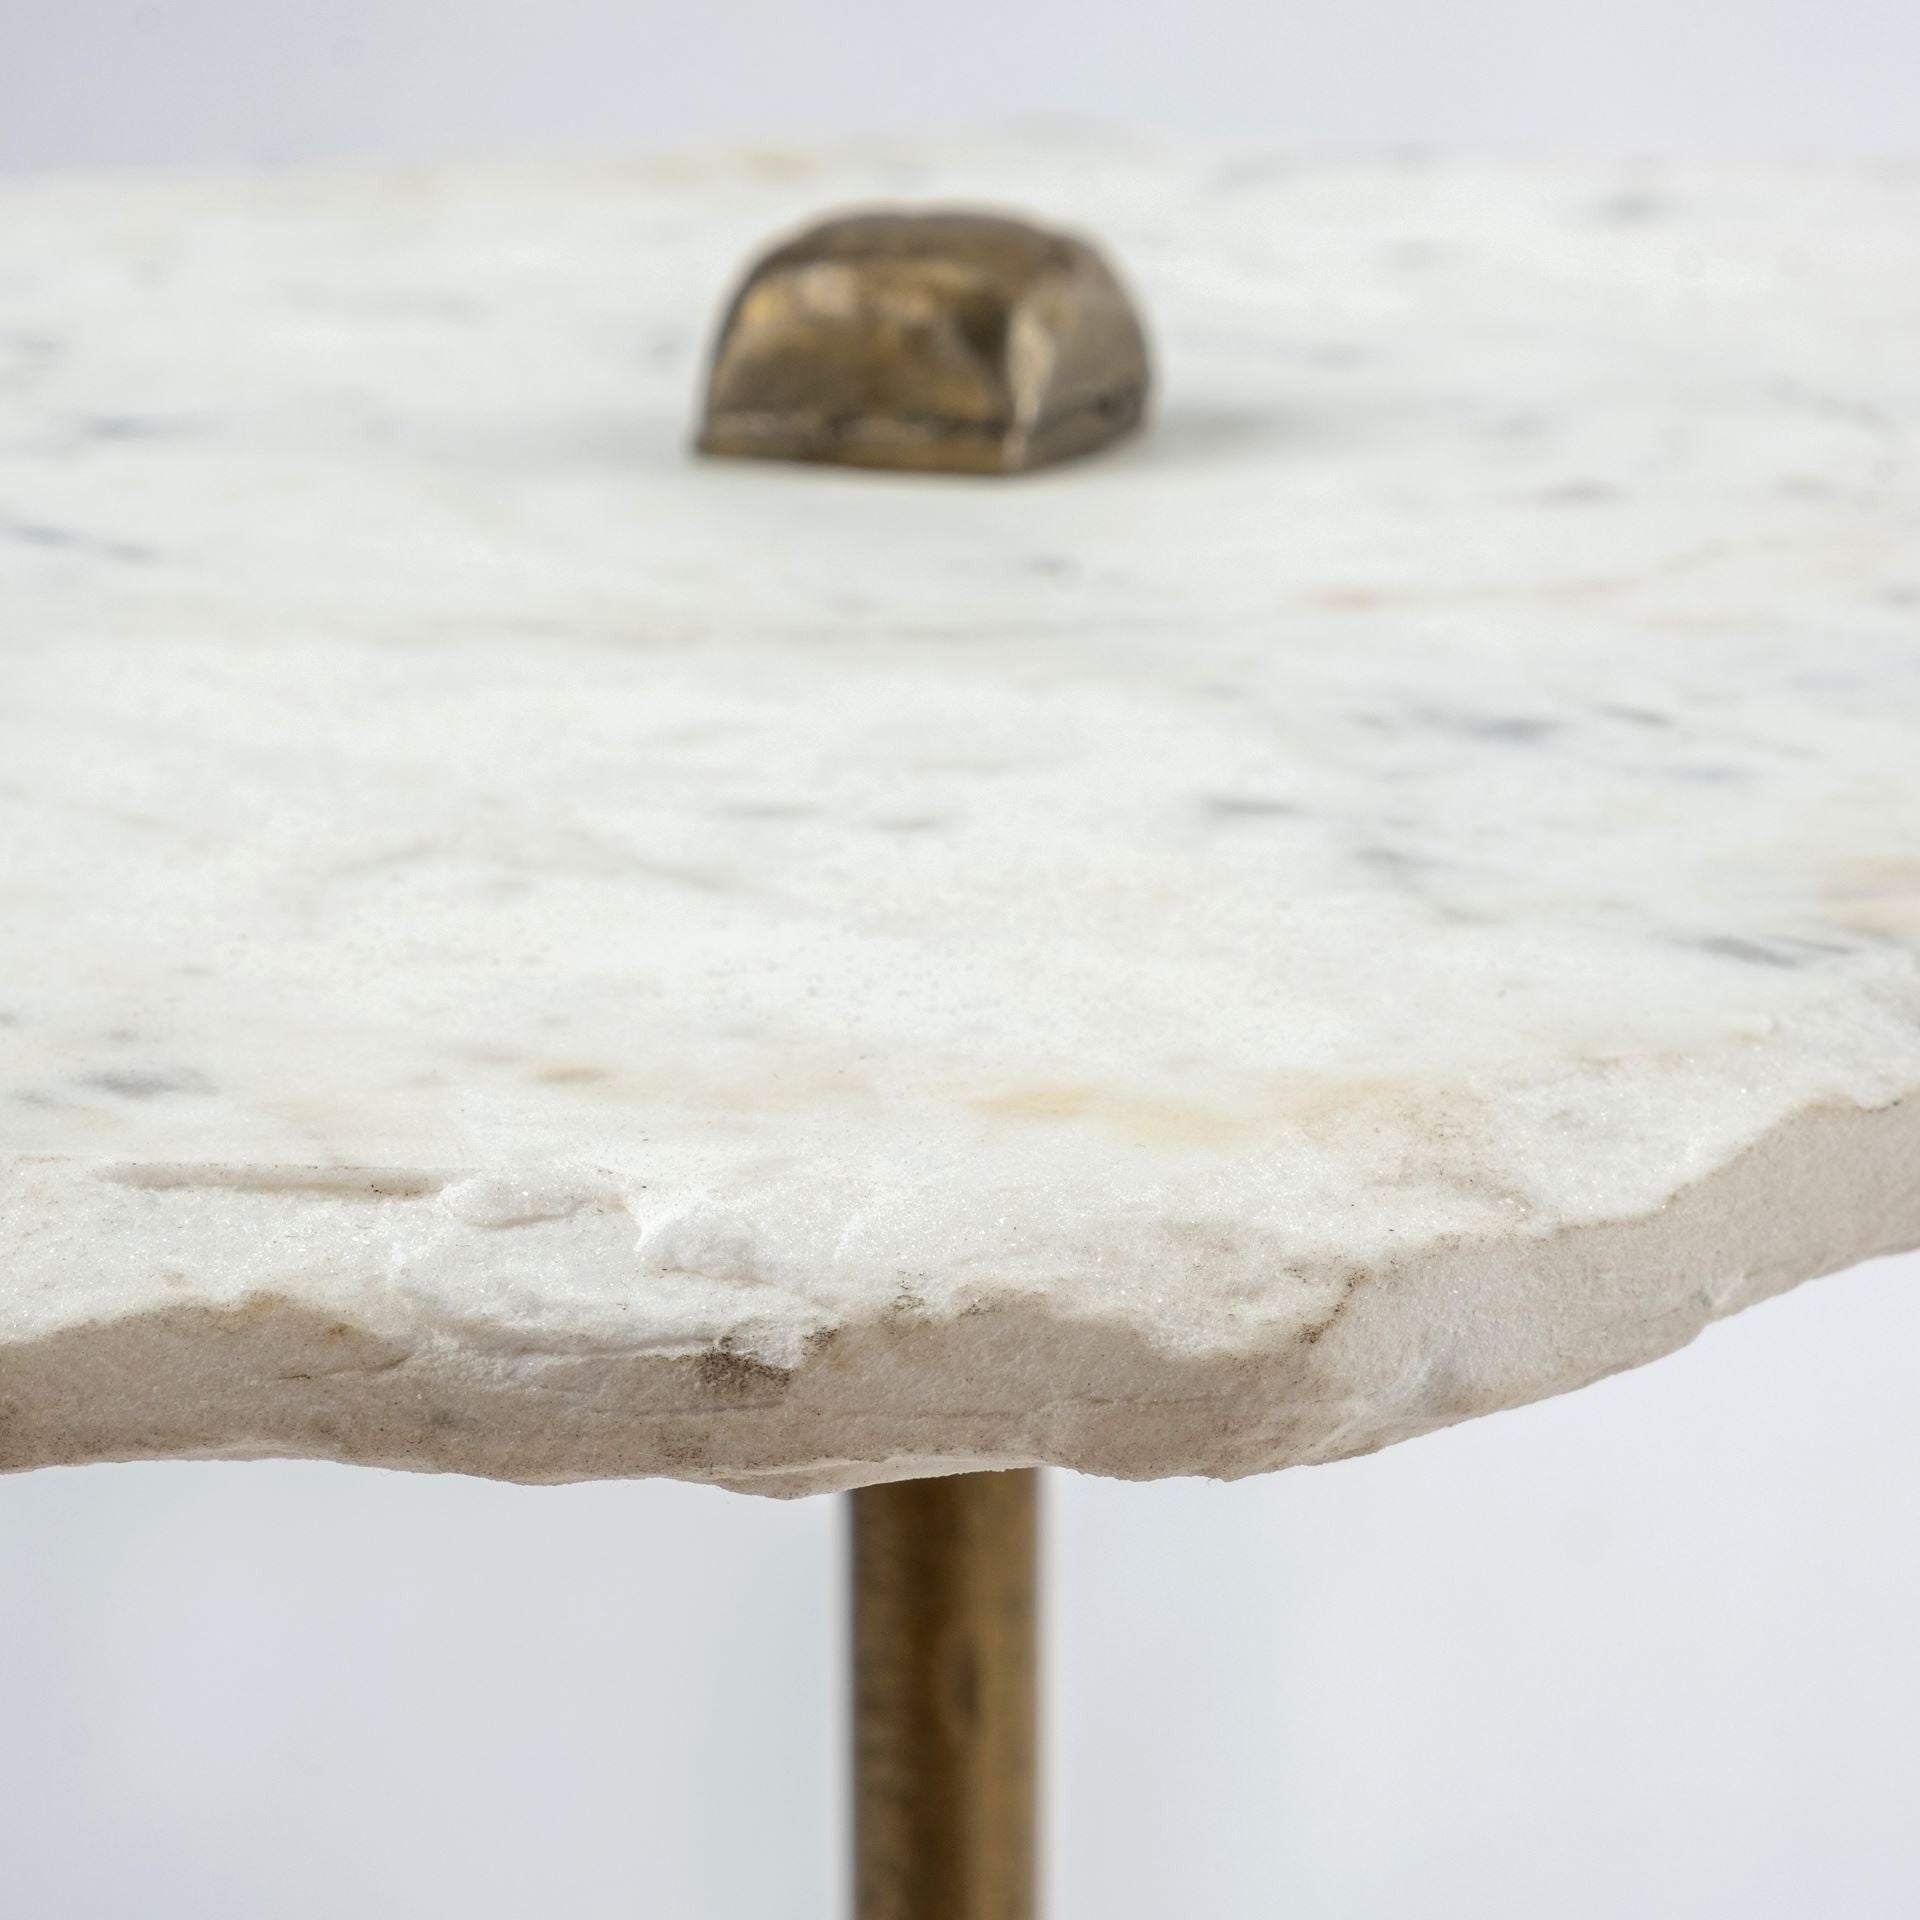 23" Gold And White Marble End Table